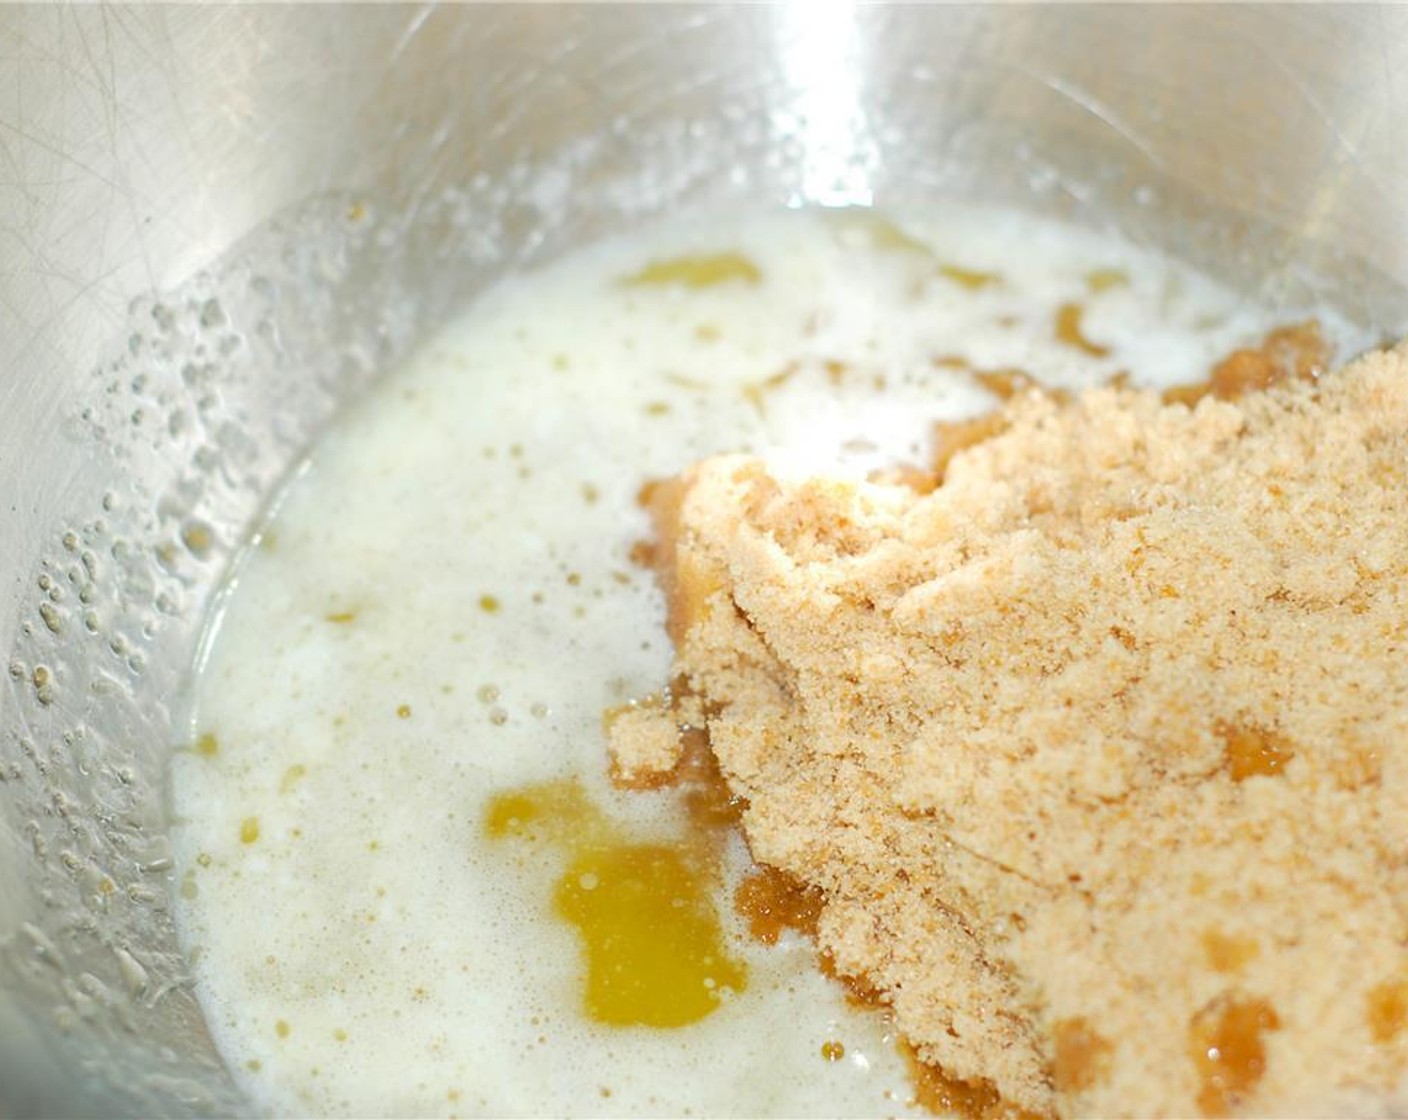 step 3 In a stand mixer bowl, add Unsalted Butter (1/3 cup) and Brown Sugar (1 cup) and mix until combined.